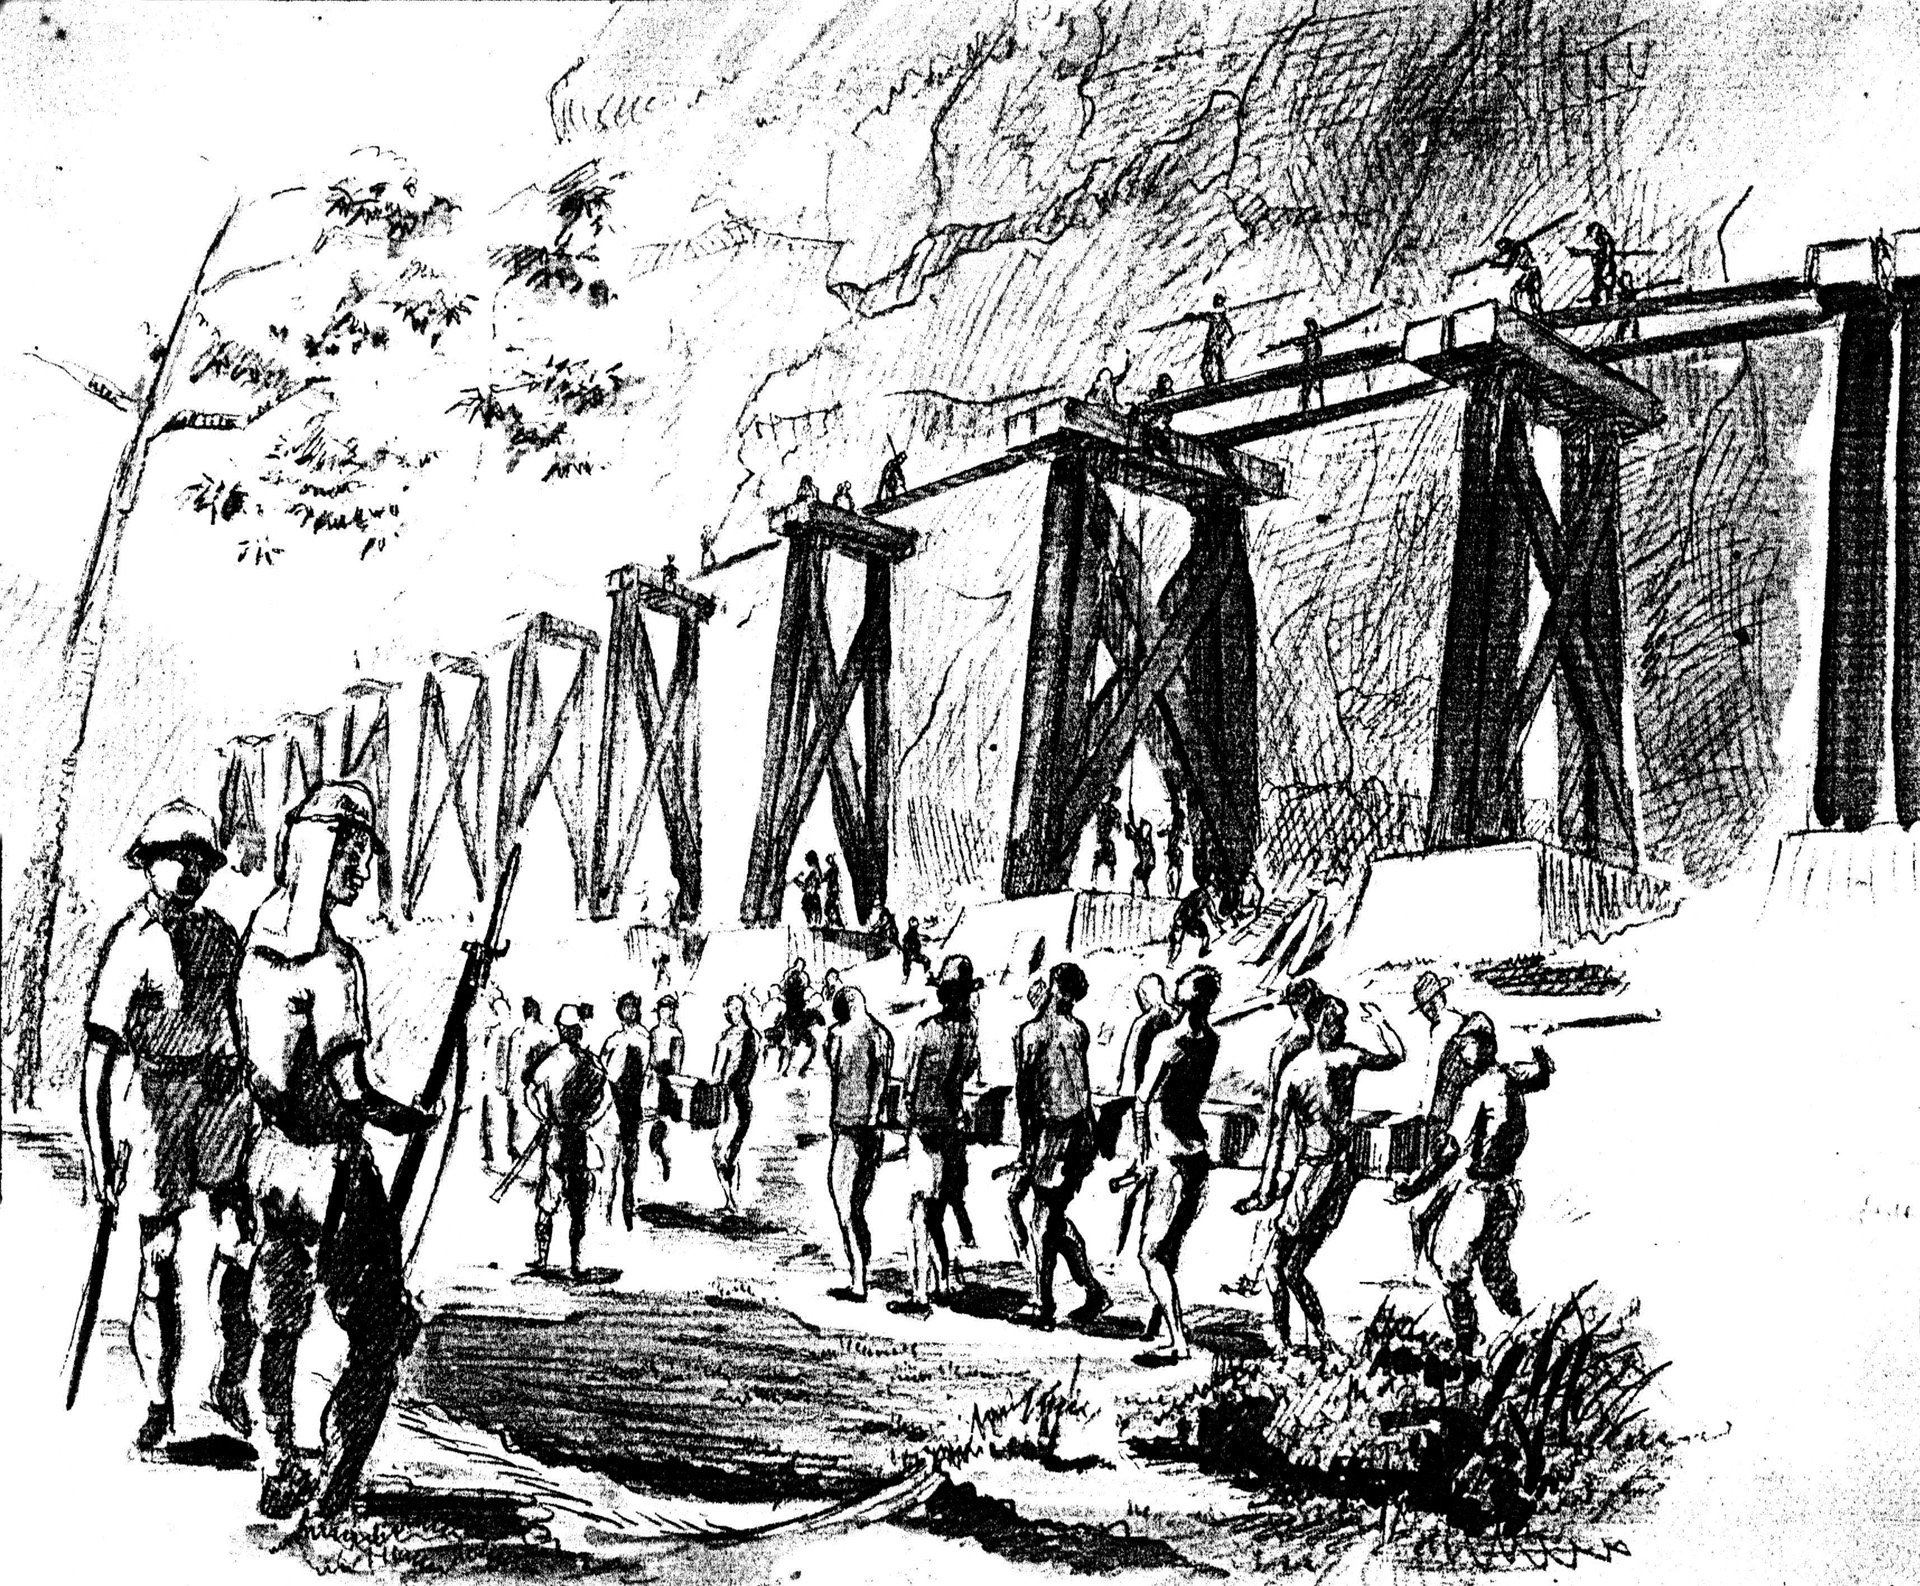 A prisoner named W.C. Wilder made this sketch in 1943 of a work gang constructing the Wampo Viaduct, a major engineering project. This structure is the only one of the wooden bridges still standing.